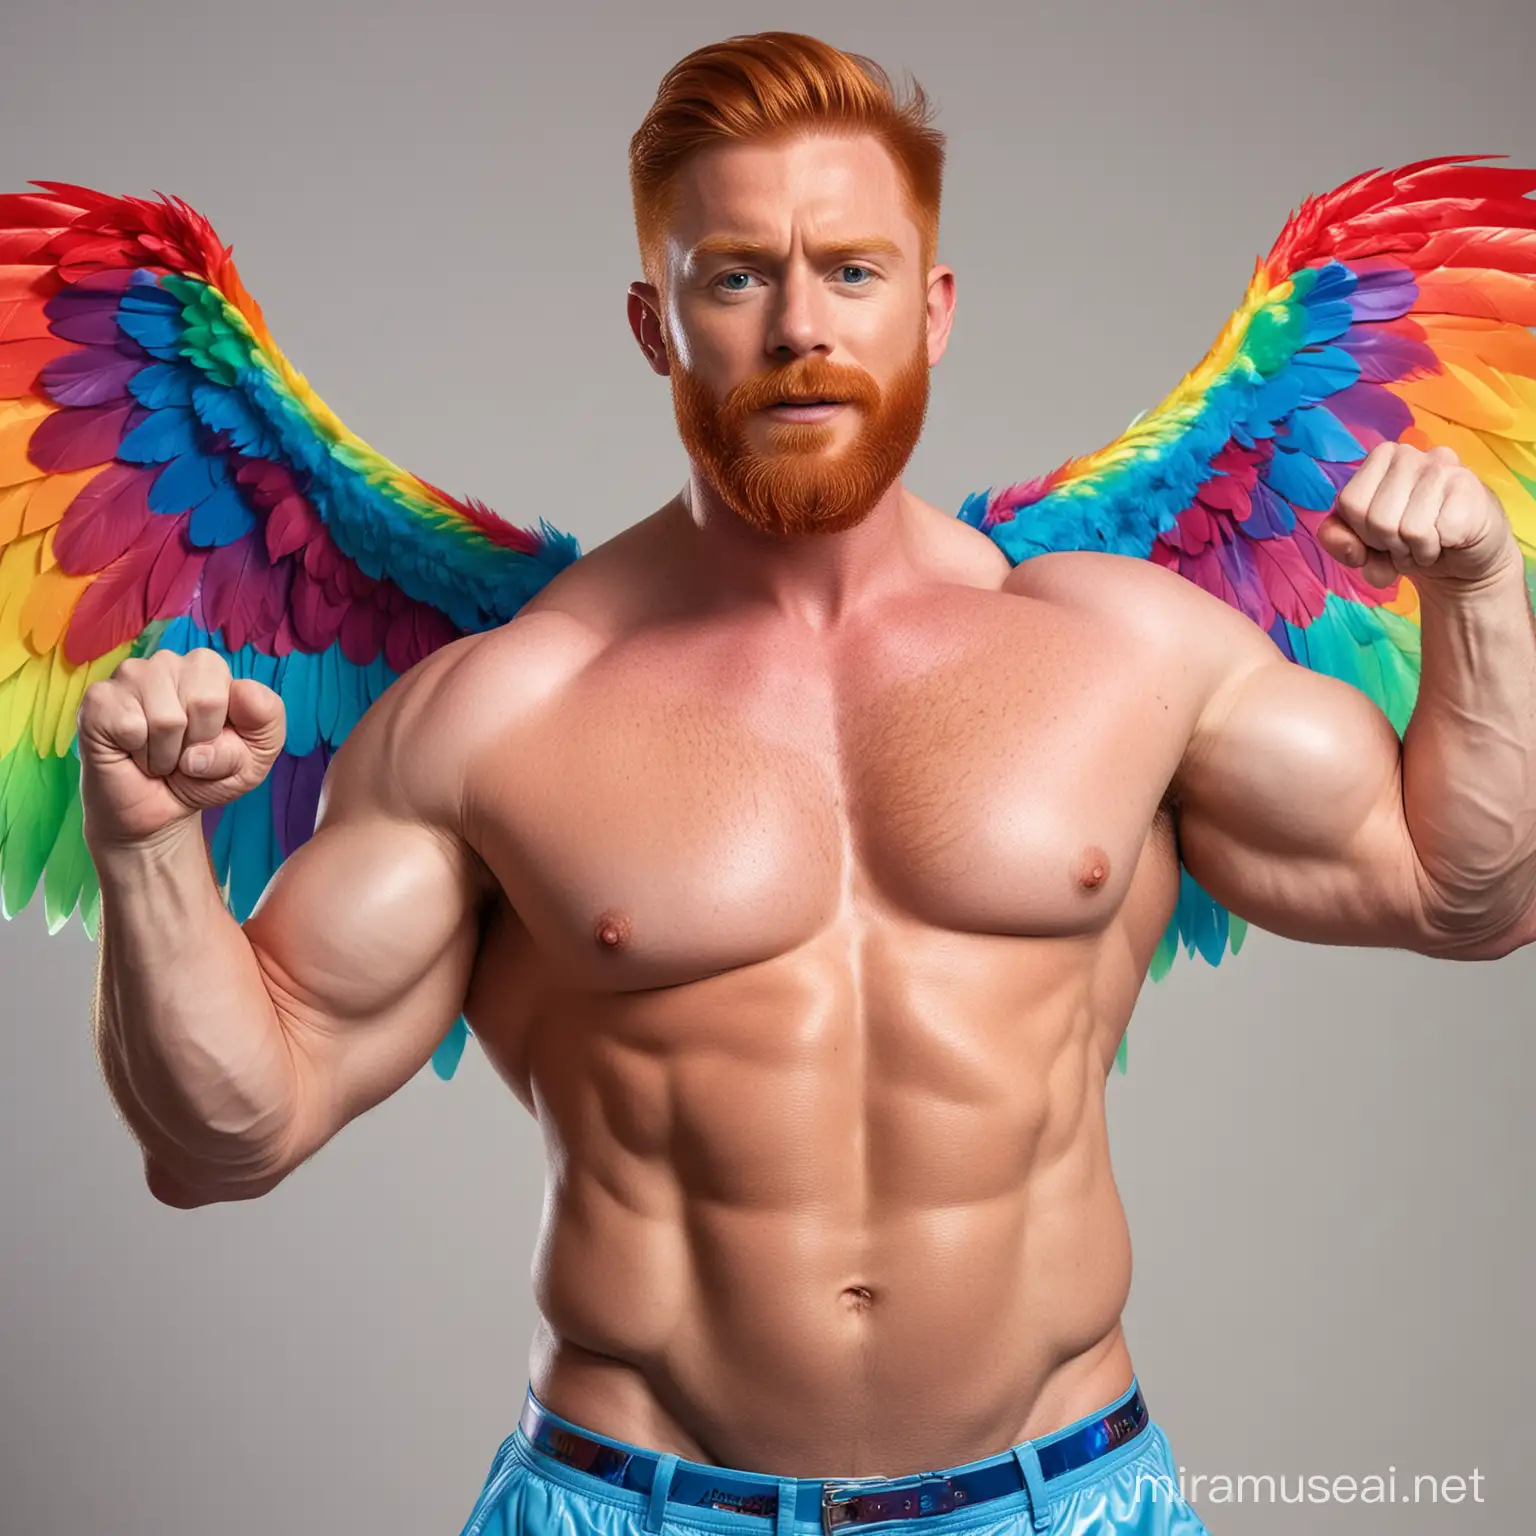 Muscular Redhead Bodybuilder Flexing Arm in Vibrant Rainbow Jacket with Eagle Wings and Doraemon